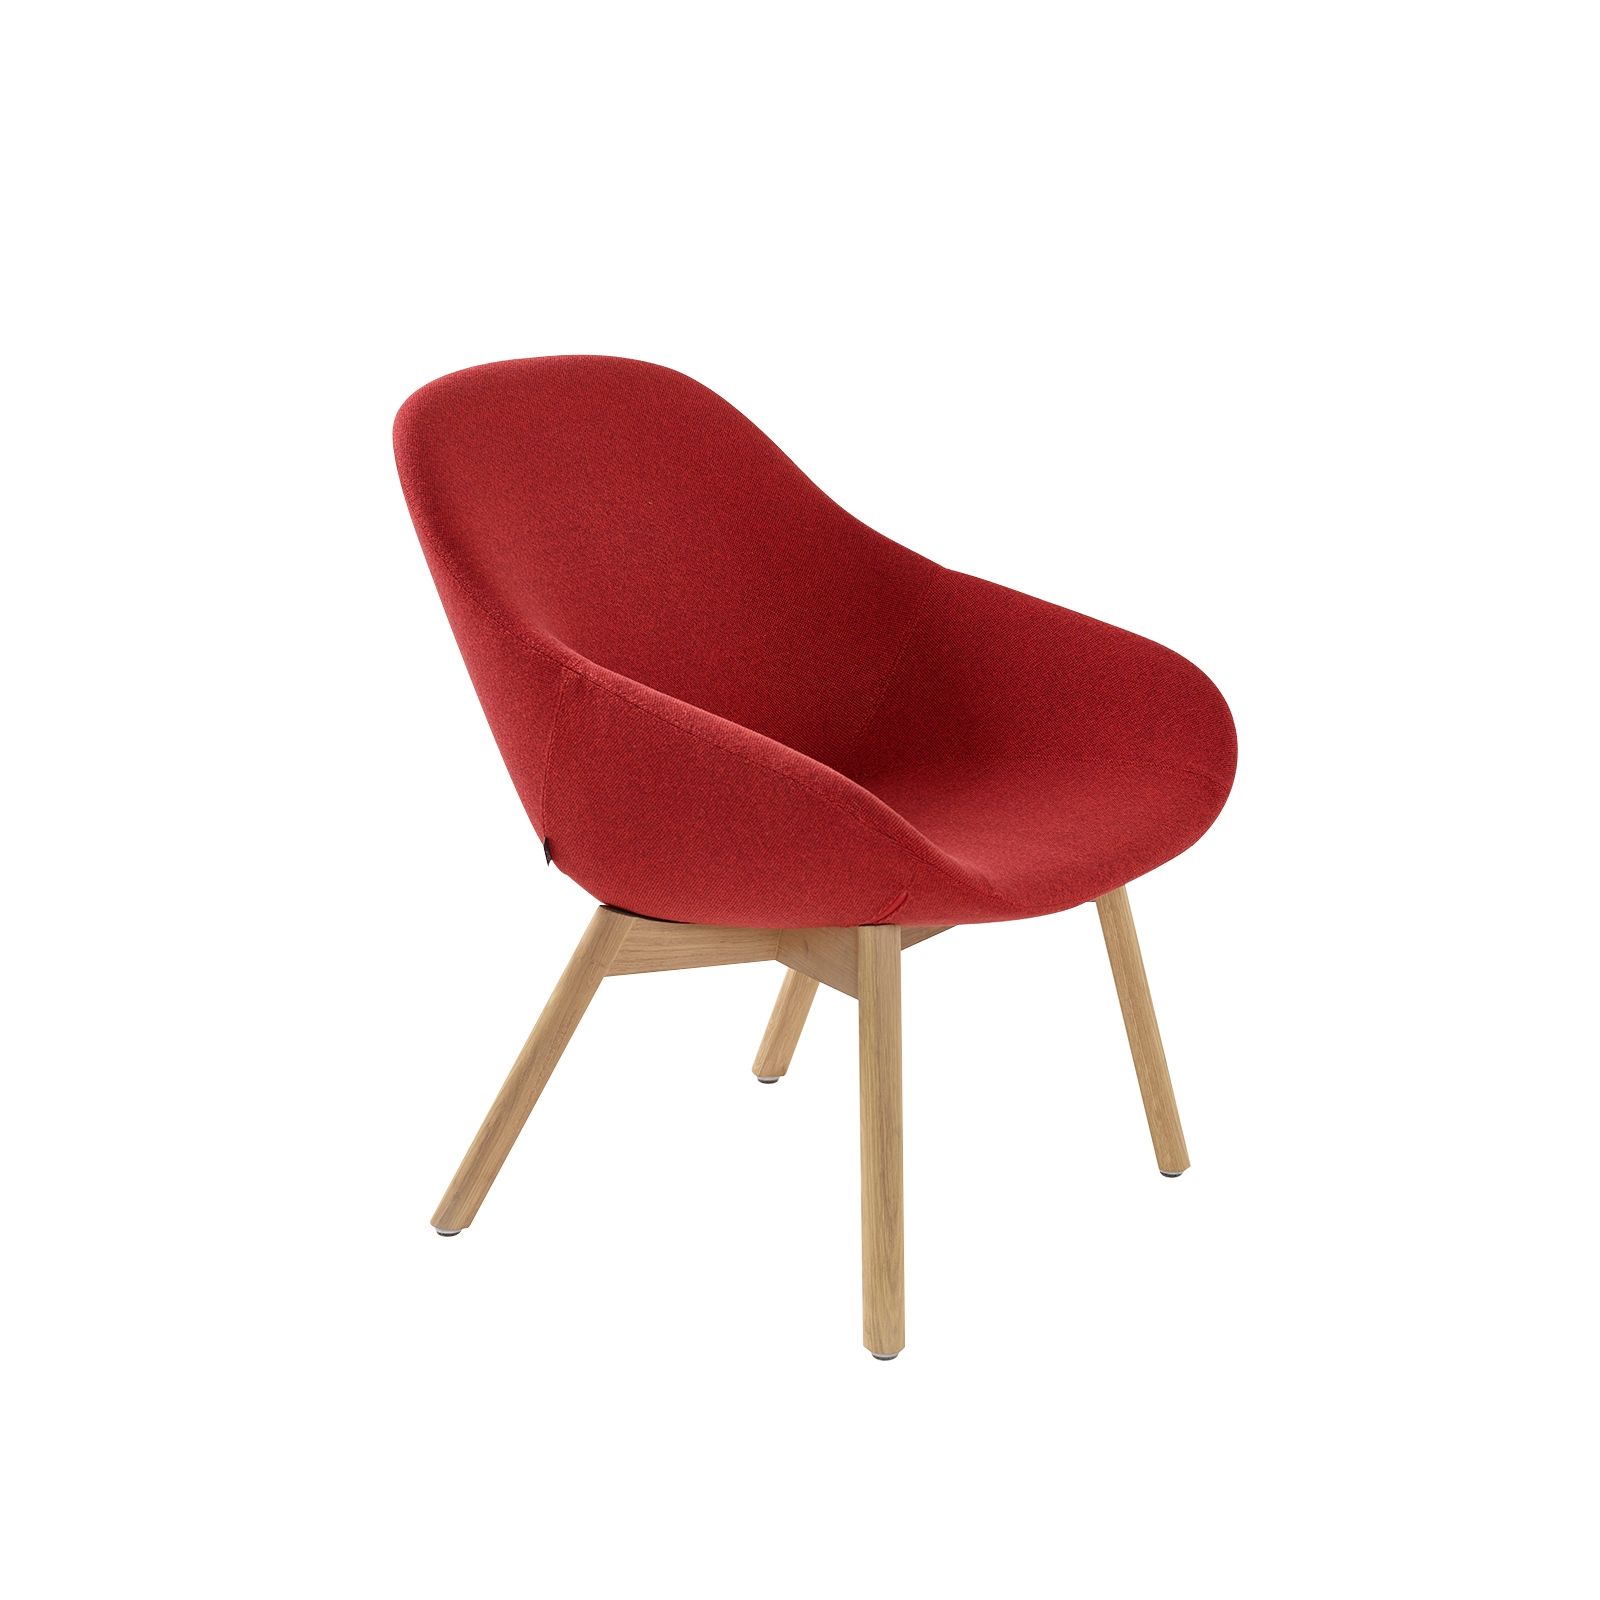 BESO LOUNGE CHAIR